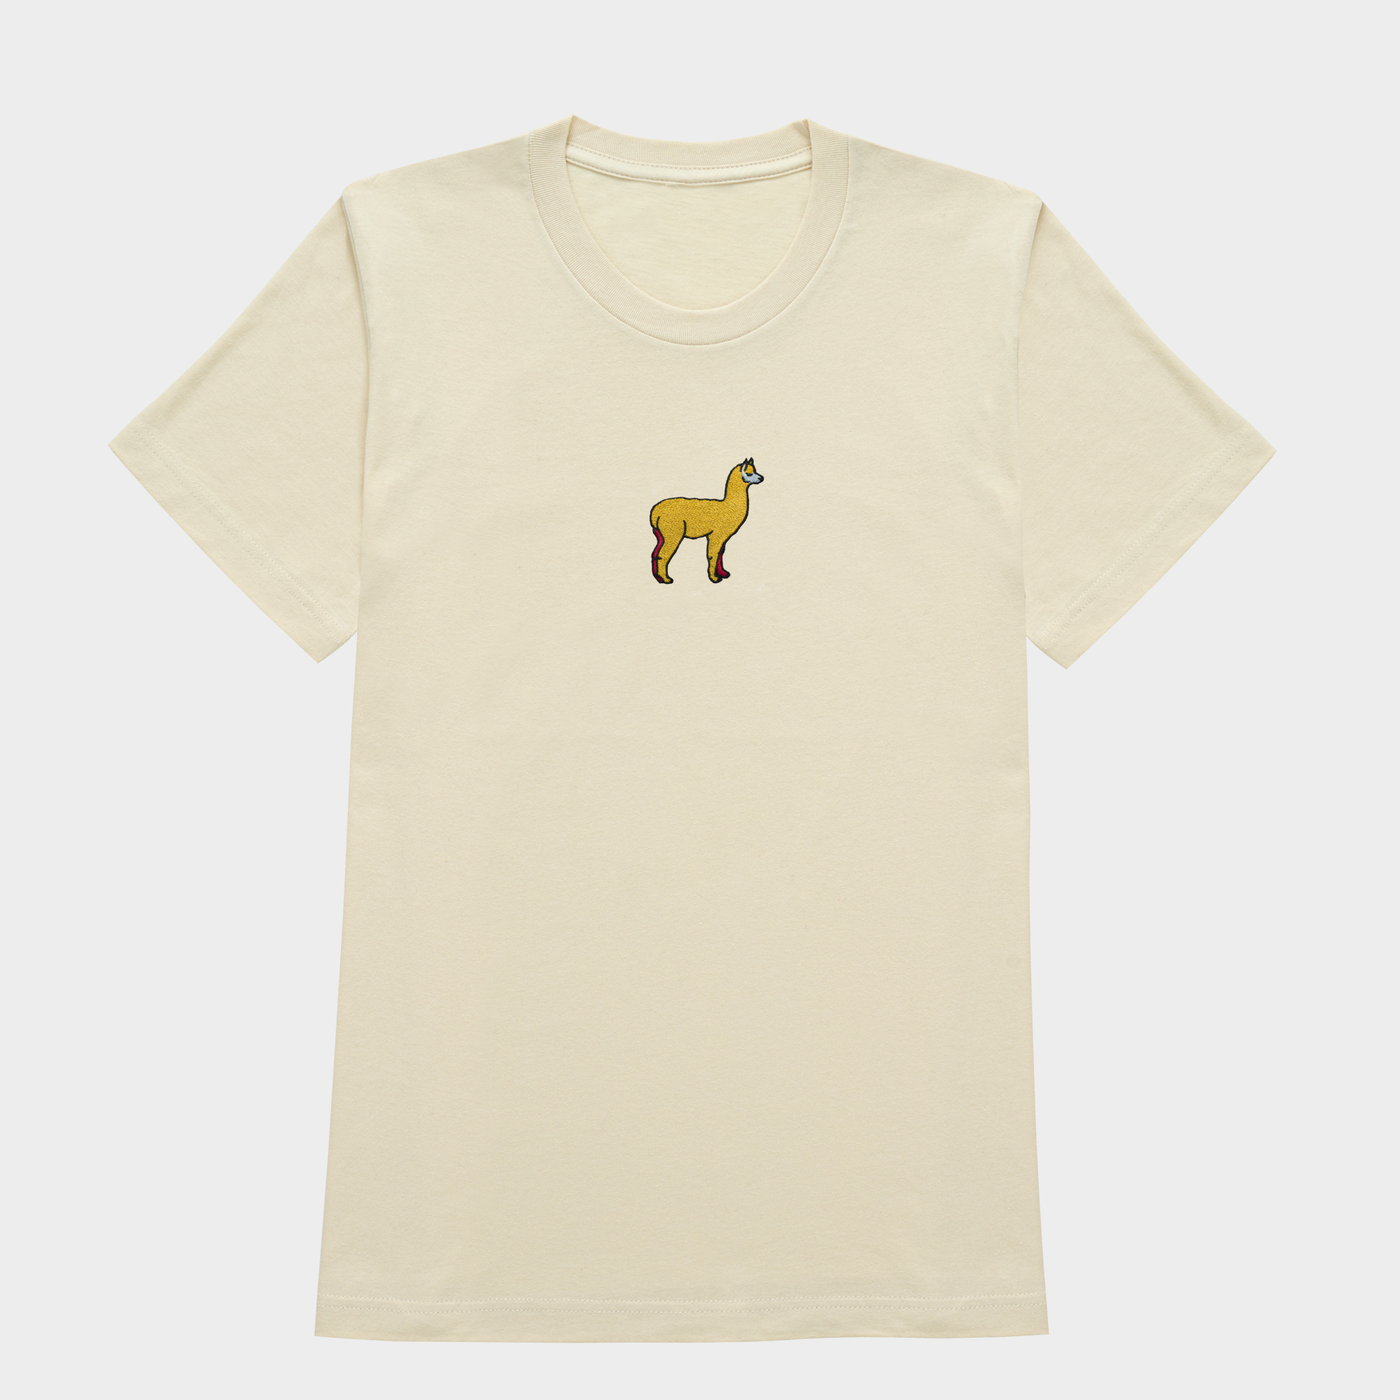 Bobby's Planet Women's Embroidered Alpaca T-Shirt from South American Amazon Animals Collection in Soft Cream Color#color_soft-cream